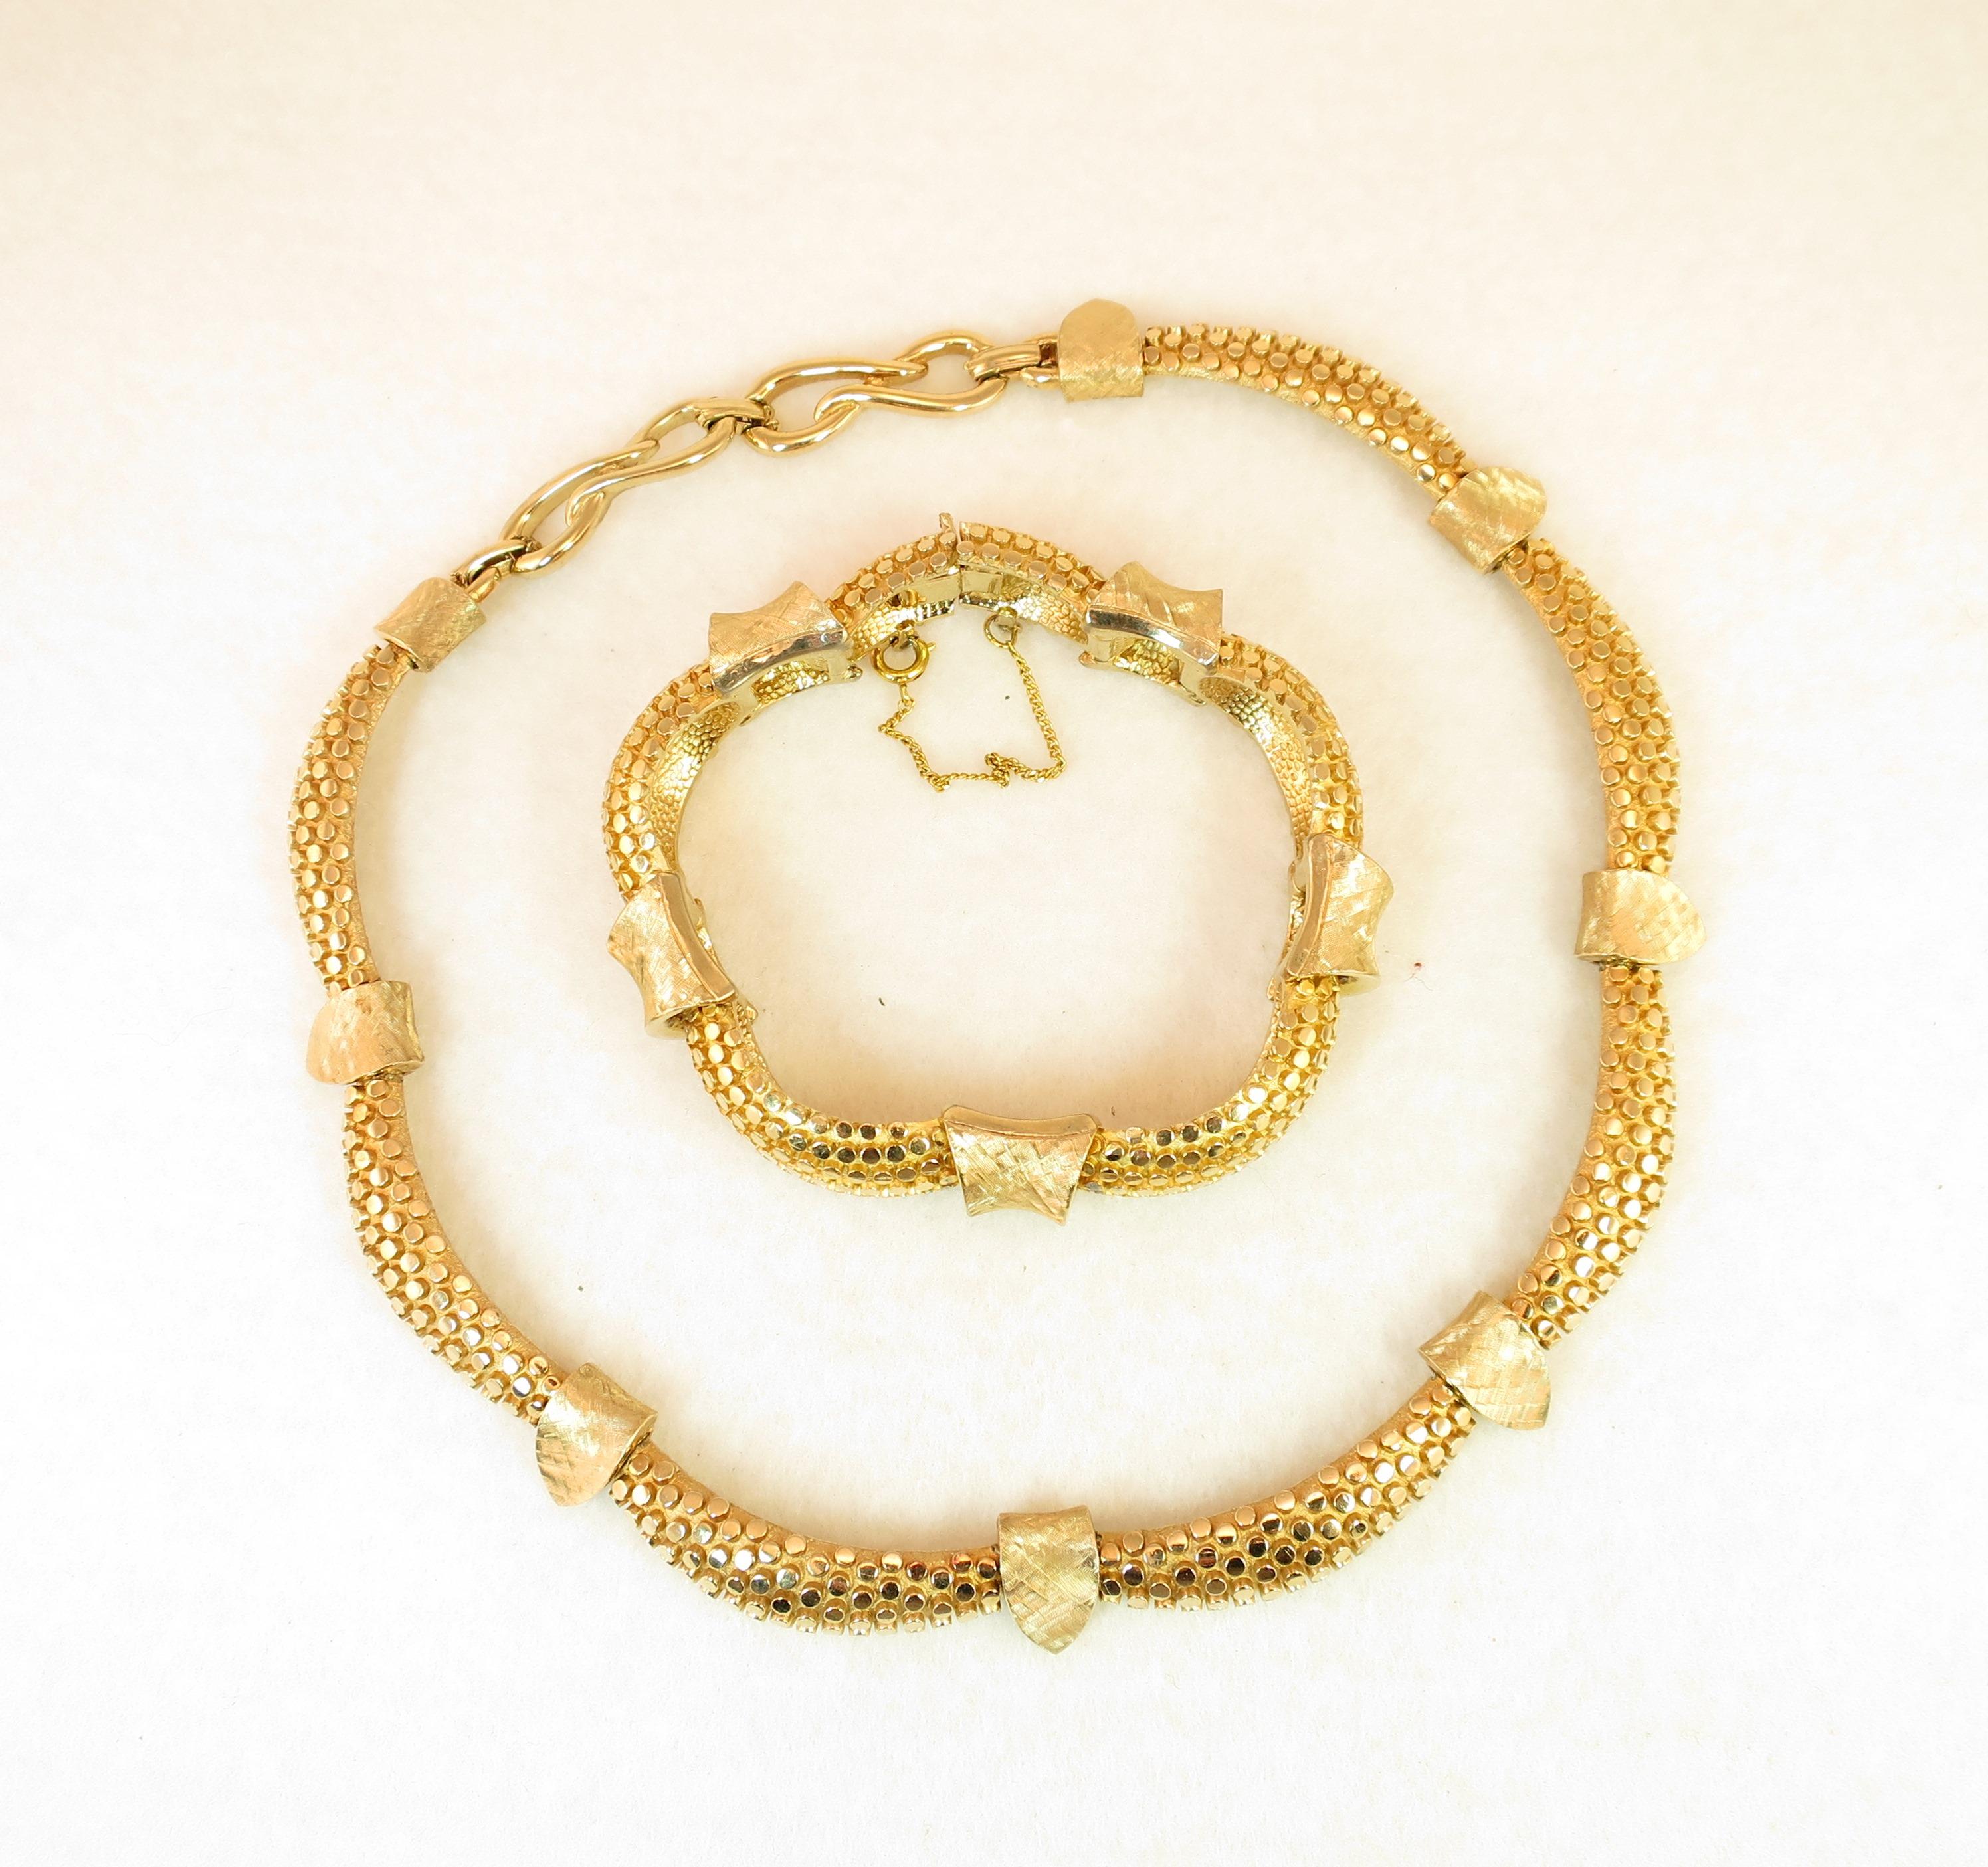 Marcel Boucher Gilded Nailhead Parure, Necklace, Bracelet, Earrings 1950s In Excellent Condition For Sale In Burbank, CA